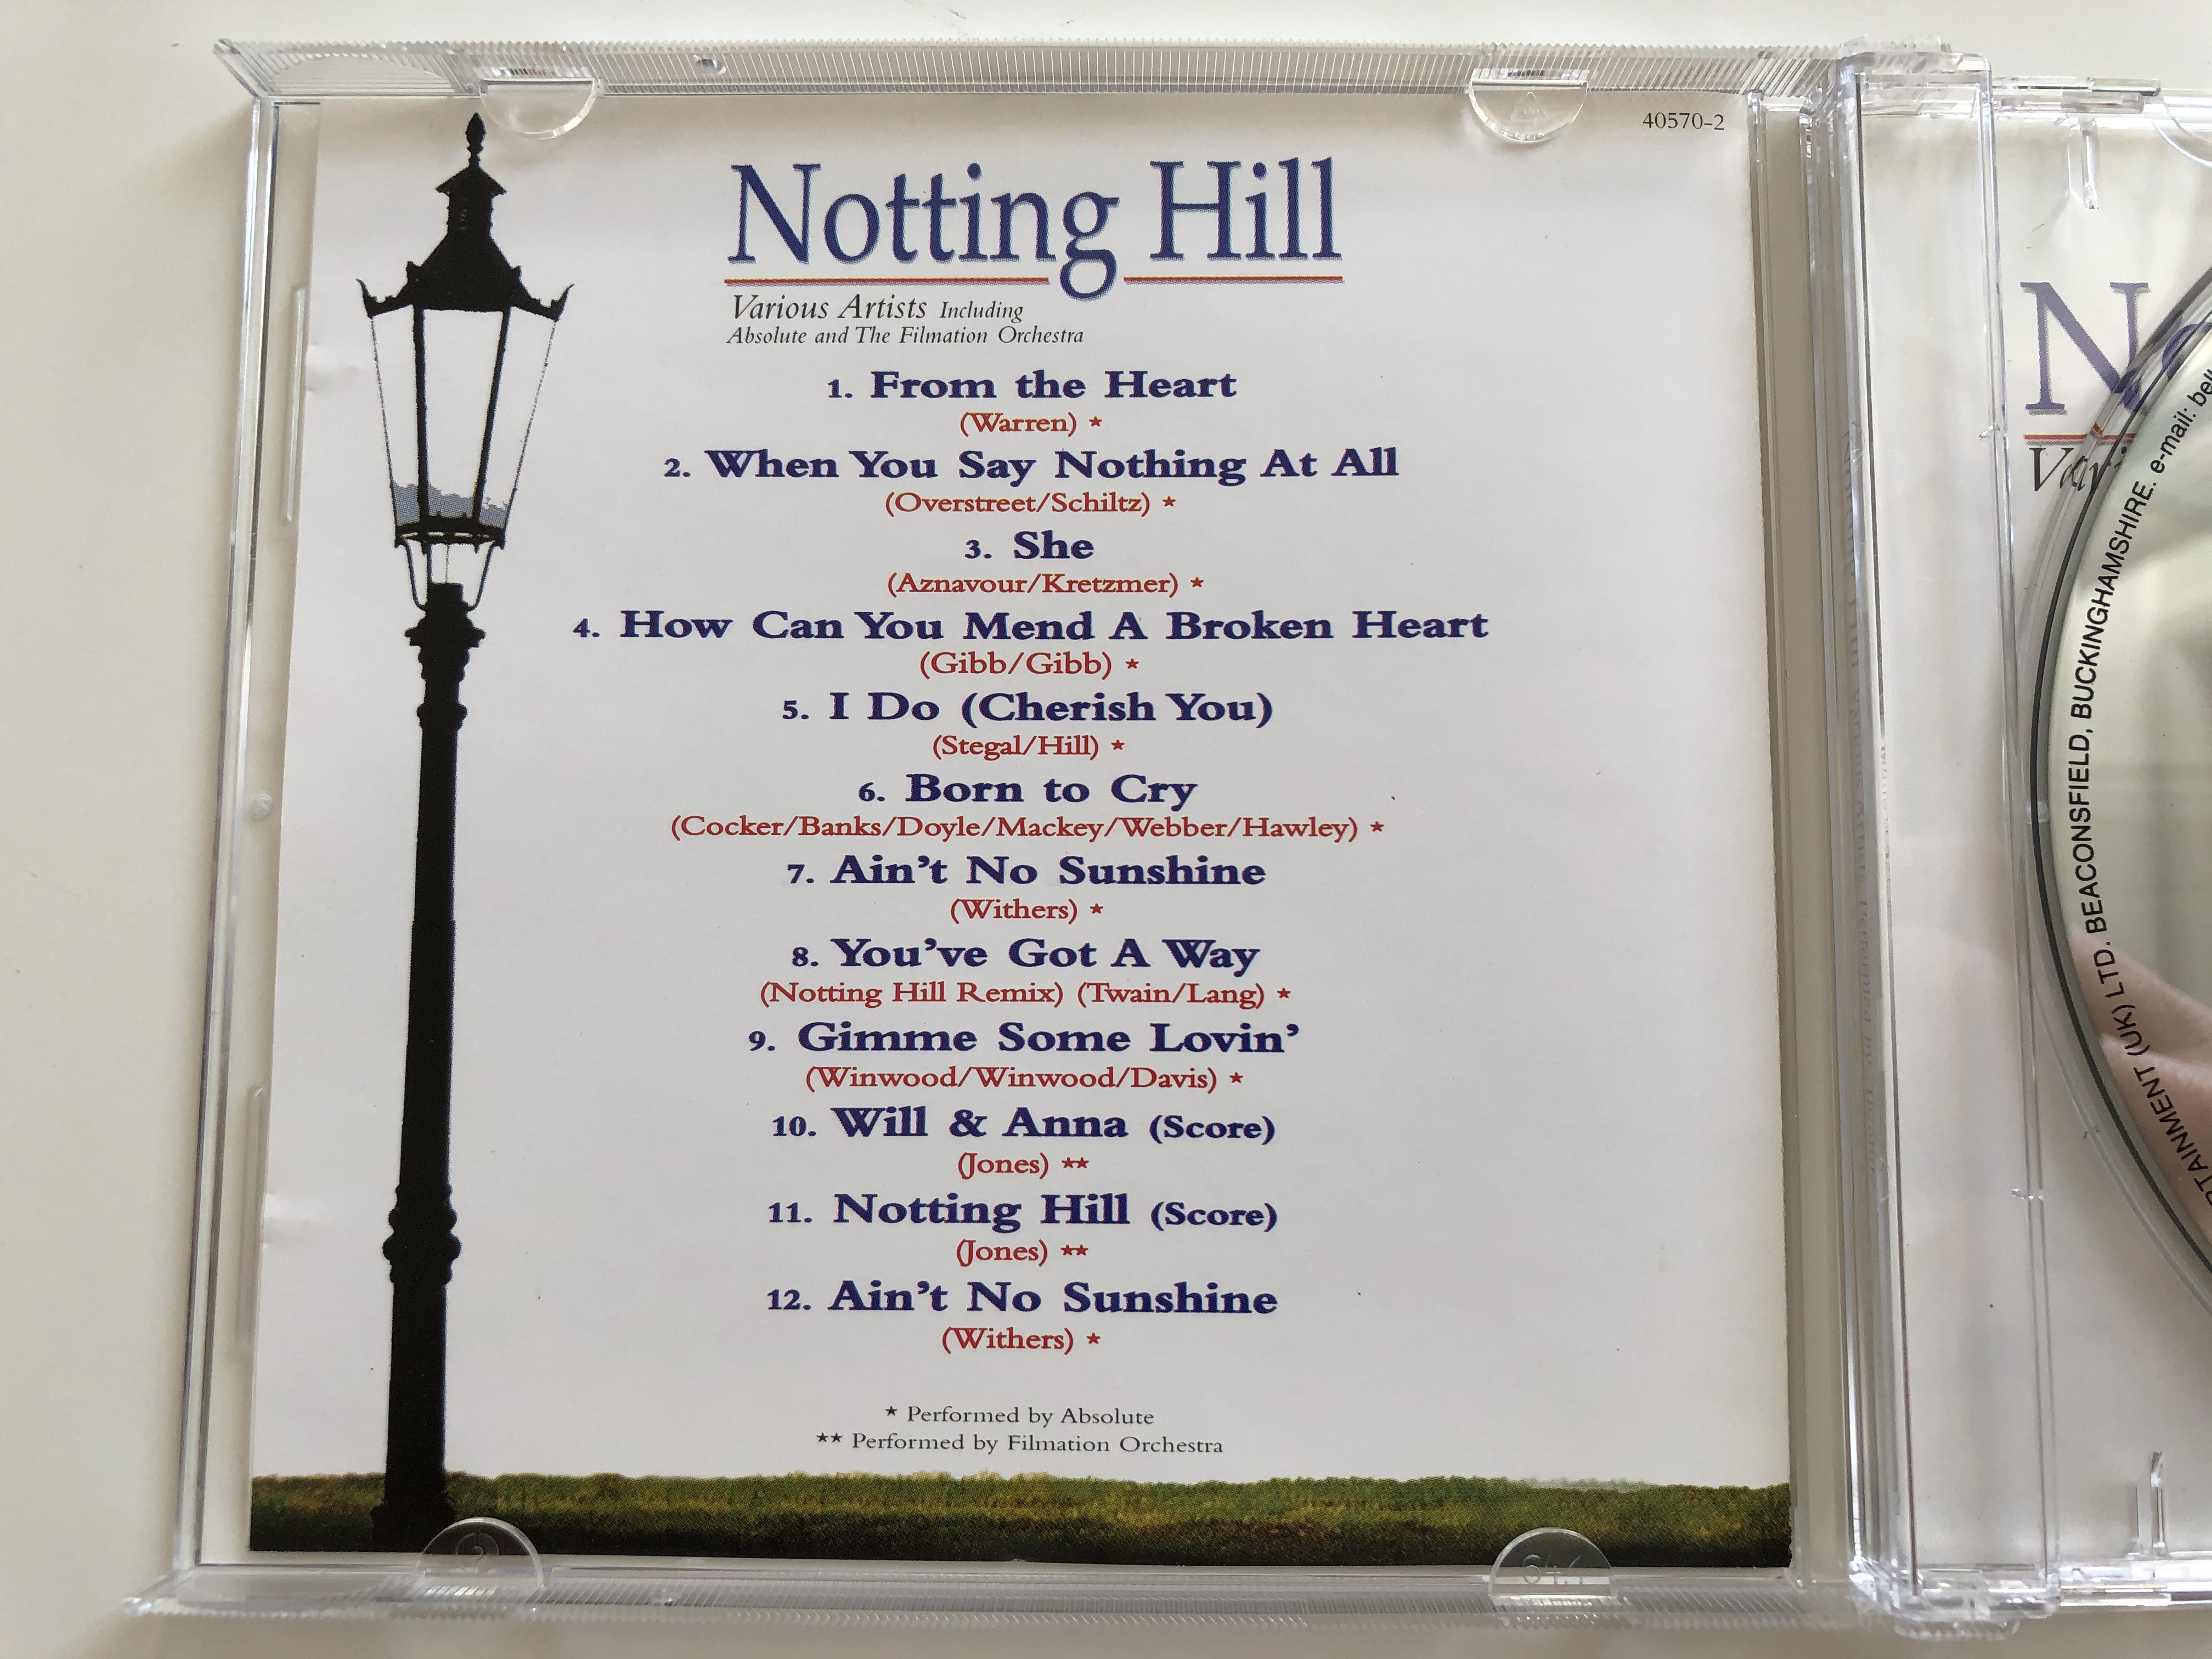 notting-hill-various-artists-including-absolute-and-the-filmation-orchestra-featuring-she-from-the-heart-how-can-you-mend-a-broken-heart-born-to-cry-nothing-hill-and-many-more-cosmopolit.jpg